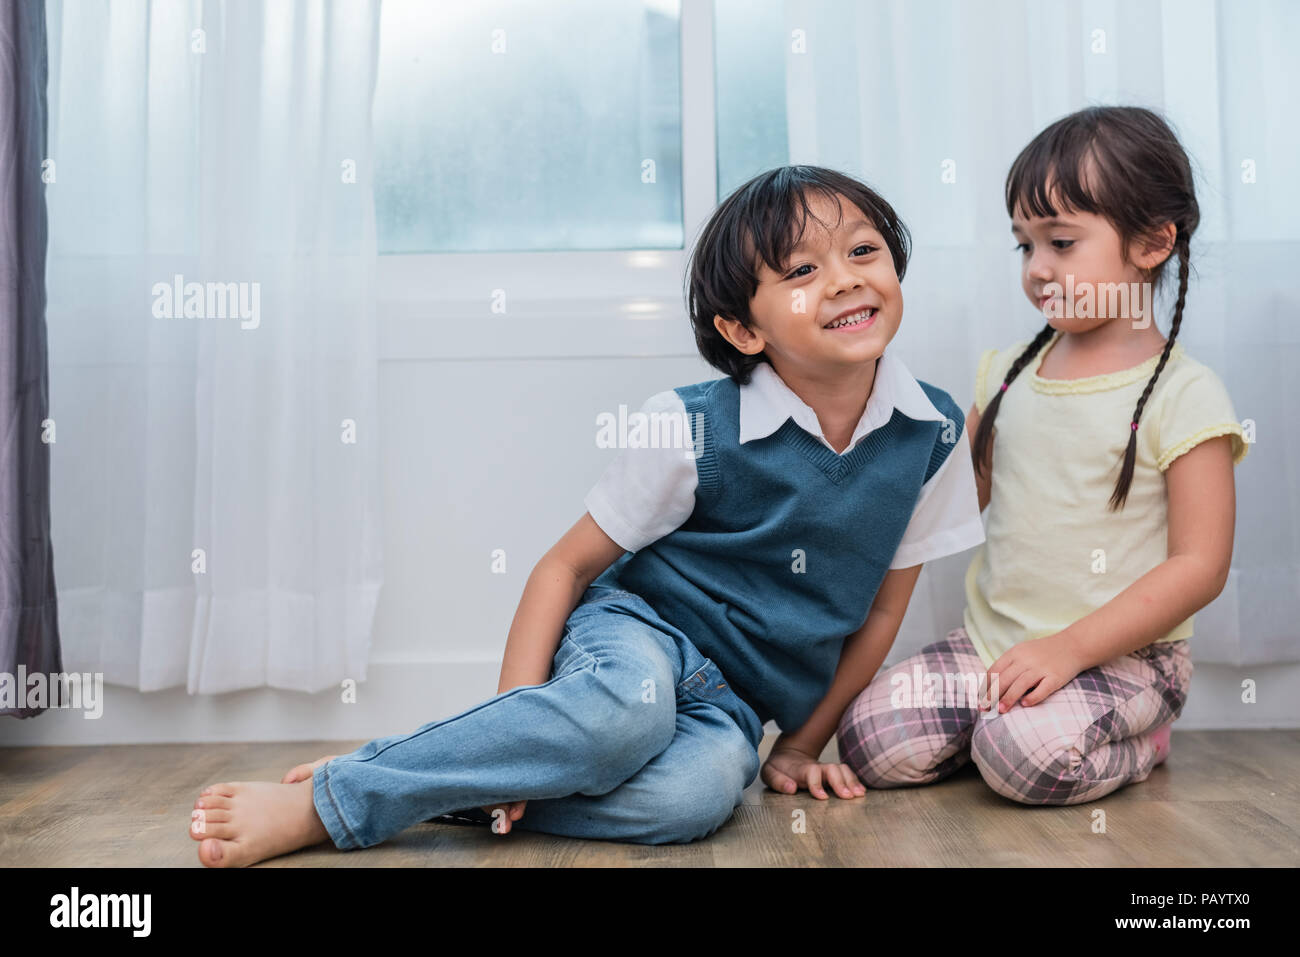 Two Caucasians brother and sister portrait. Children and kids concept. People and lifestyles concept. Happy family and sibling love theme. Stock Photo